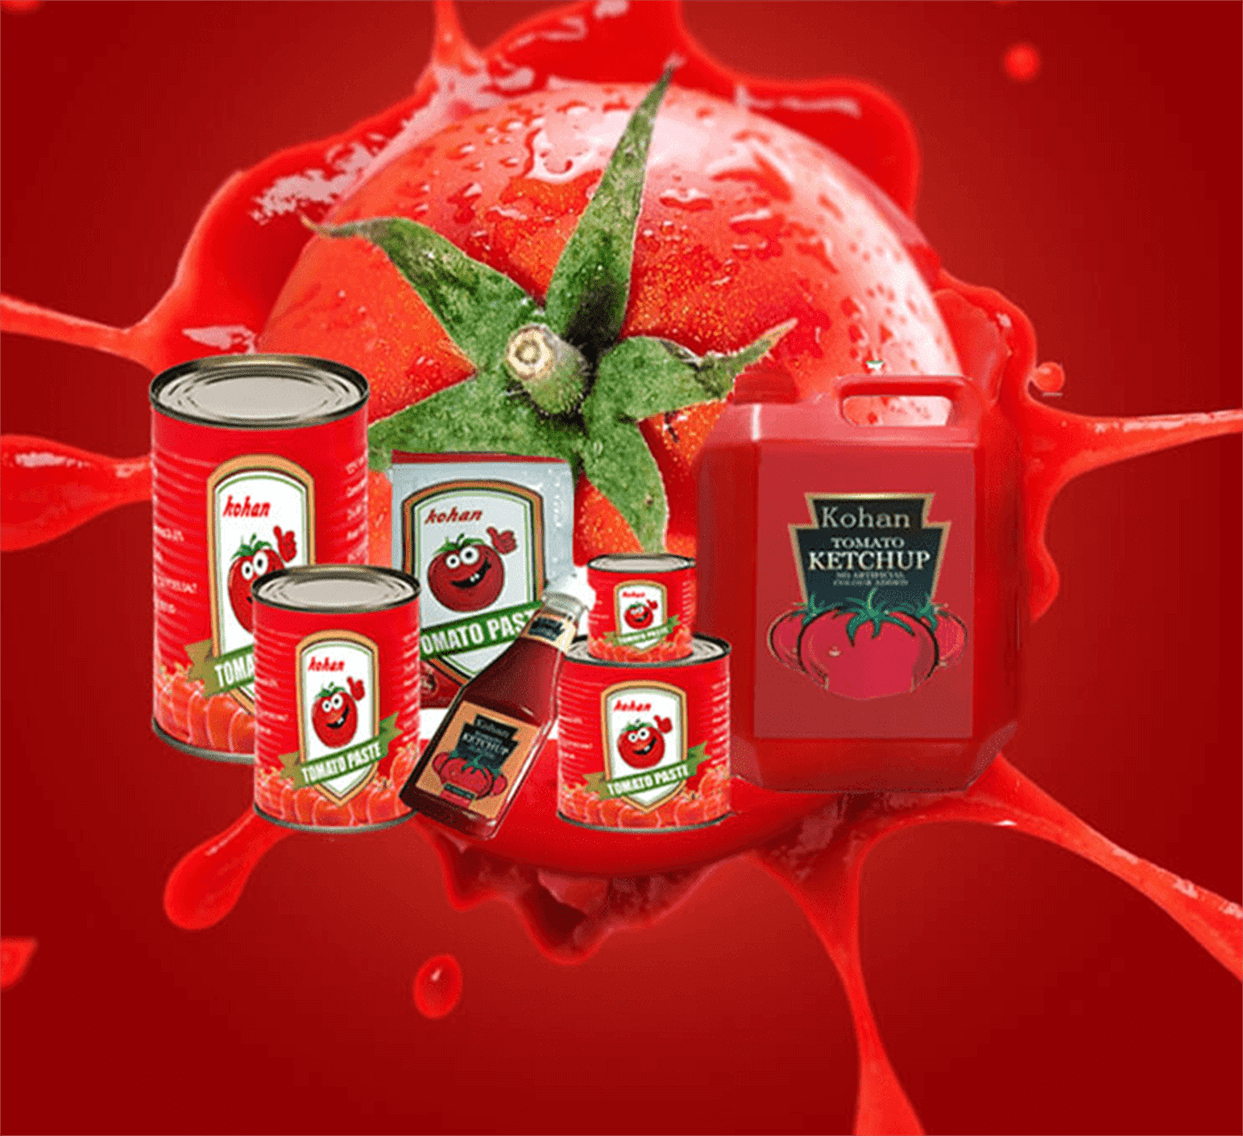 Tomato products